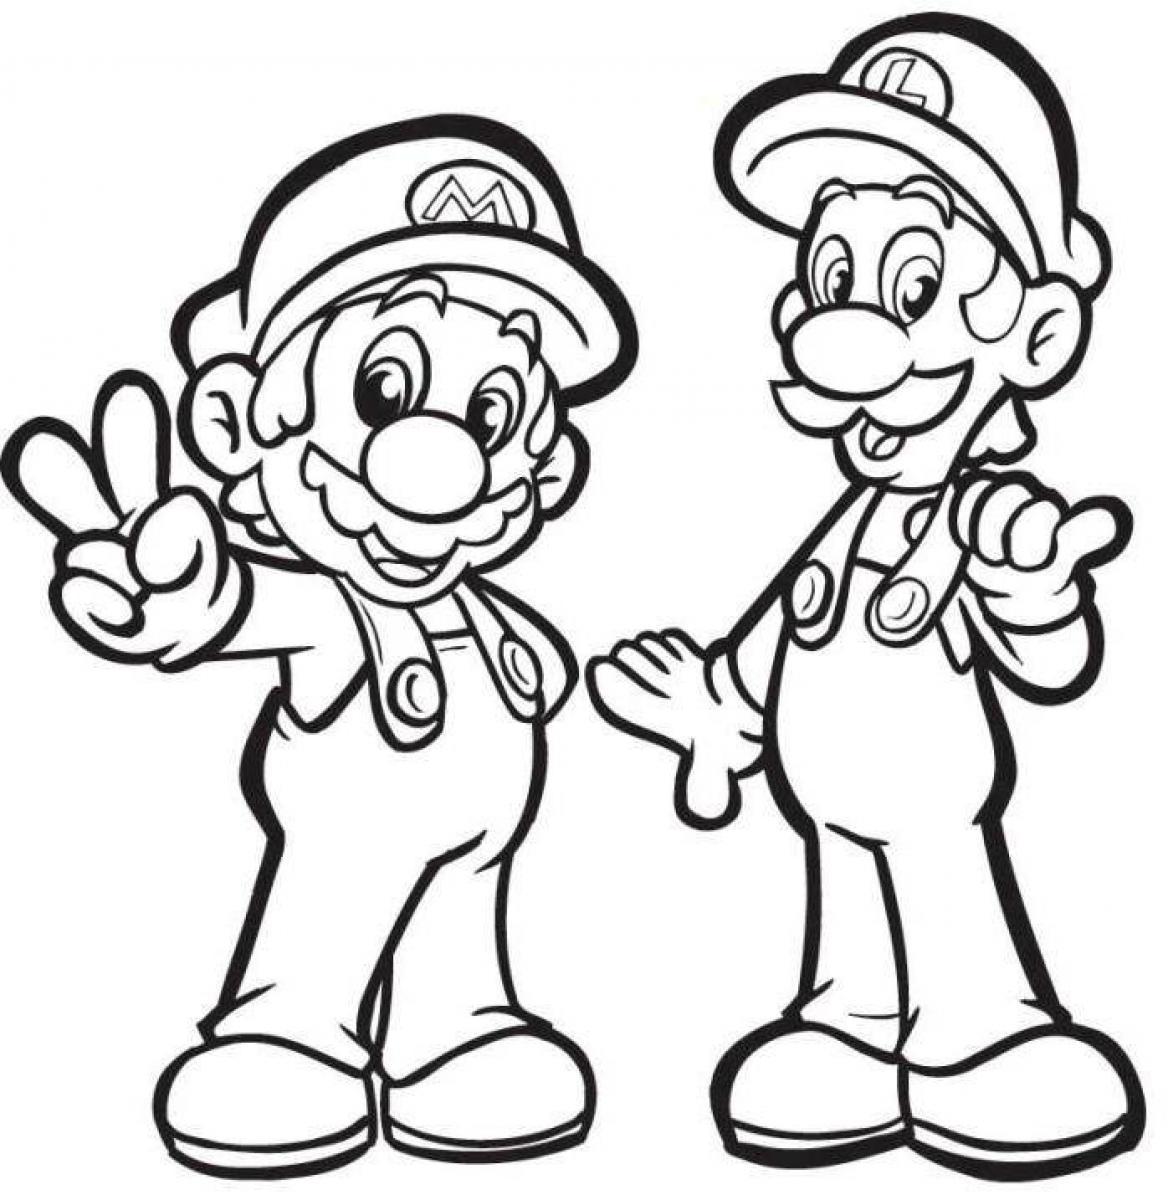  Super Mario Coloring Pages | Coloring pages for Kids | #32